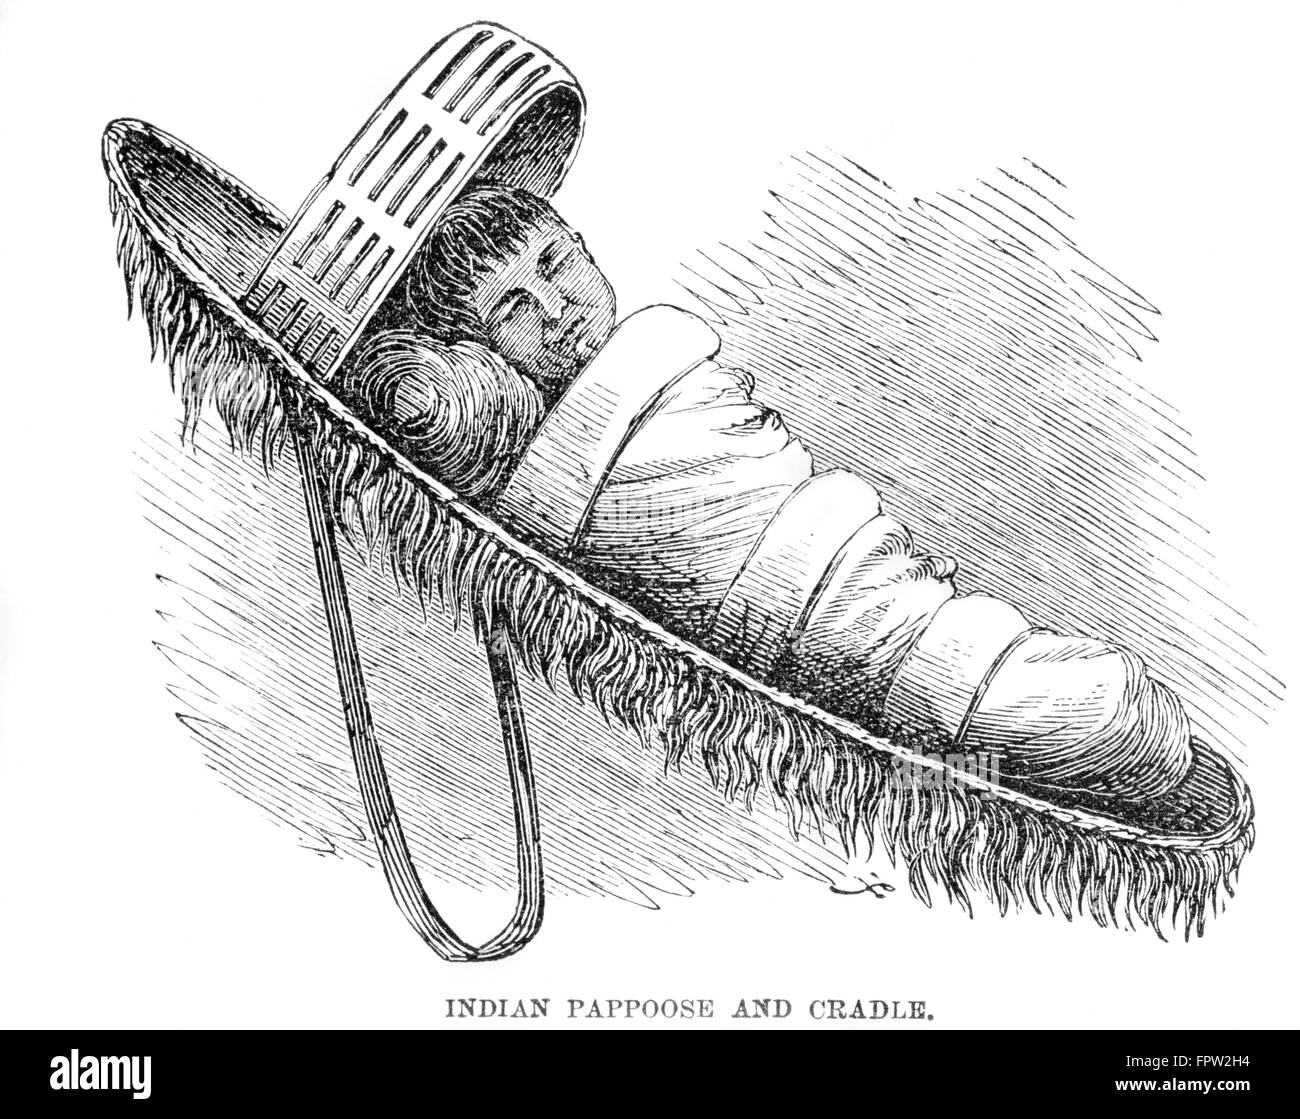 NATIVE AMERICAN INDIAN CHILD PAPOOSE ASLEEP IN A CRADLE BOARD ILLUSTRATION Stock Photo